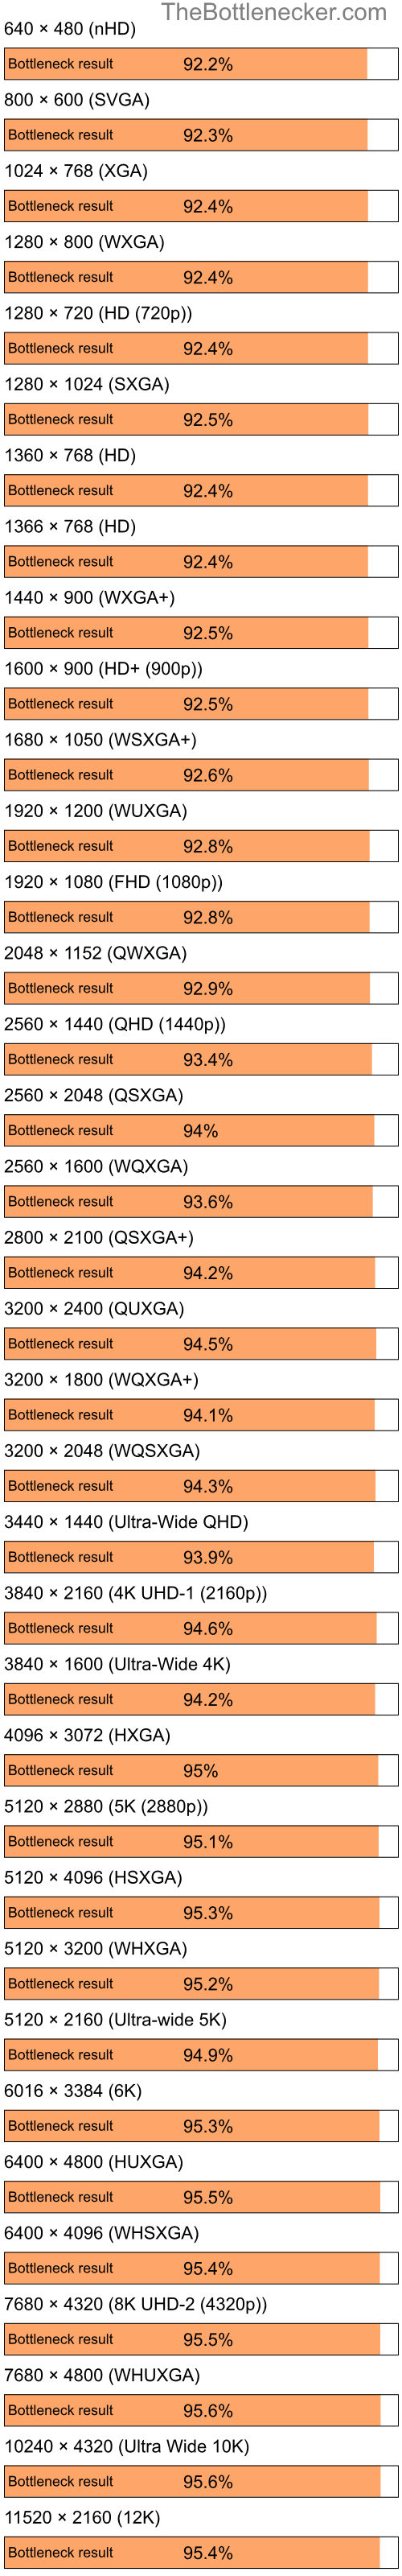 Bottleneck results by resolution for Intel Pentium 4 and NVIDIA GeForce2 MX in Graphic Card Intense Tasks